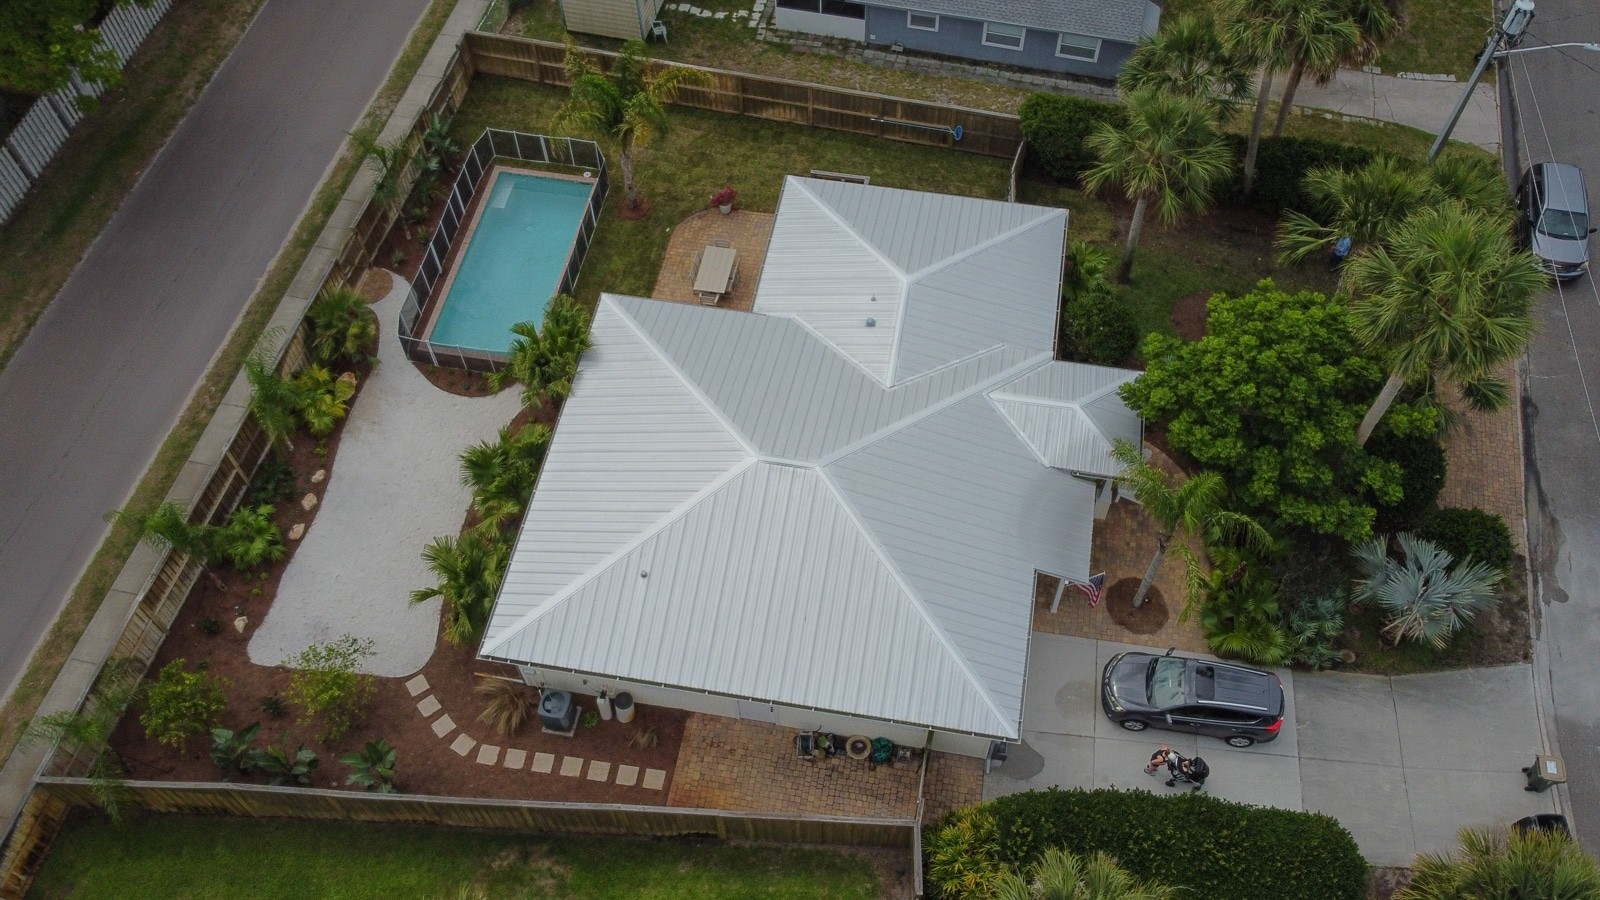 Drone view 3 Pearson residence - Atlantic Beach FL swimming pool landscaping design and hardscapes by Rockaway